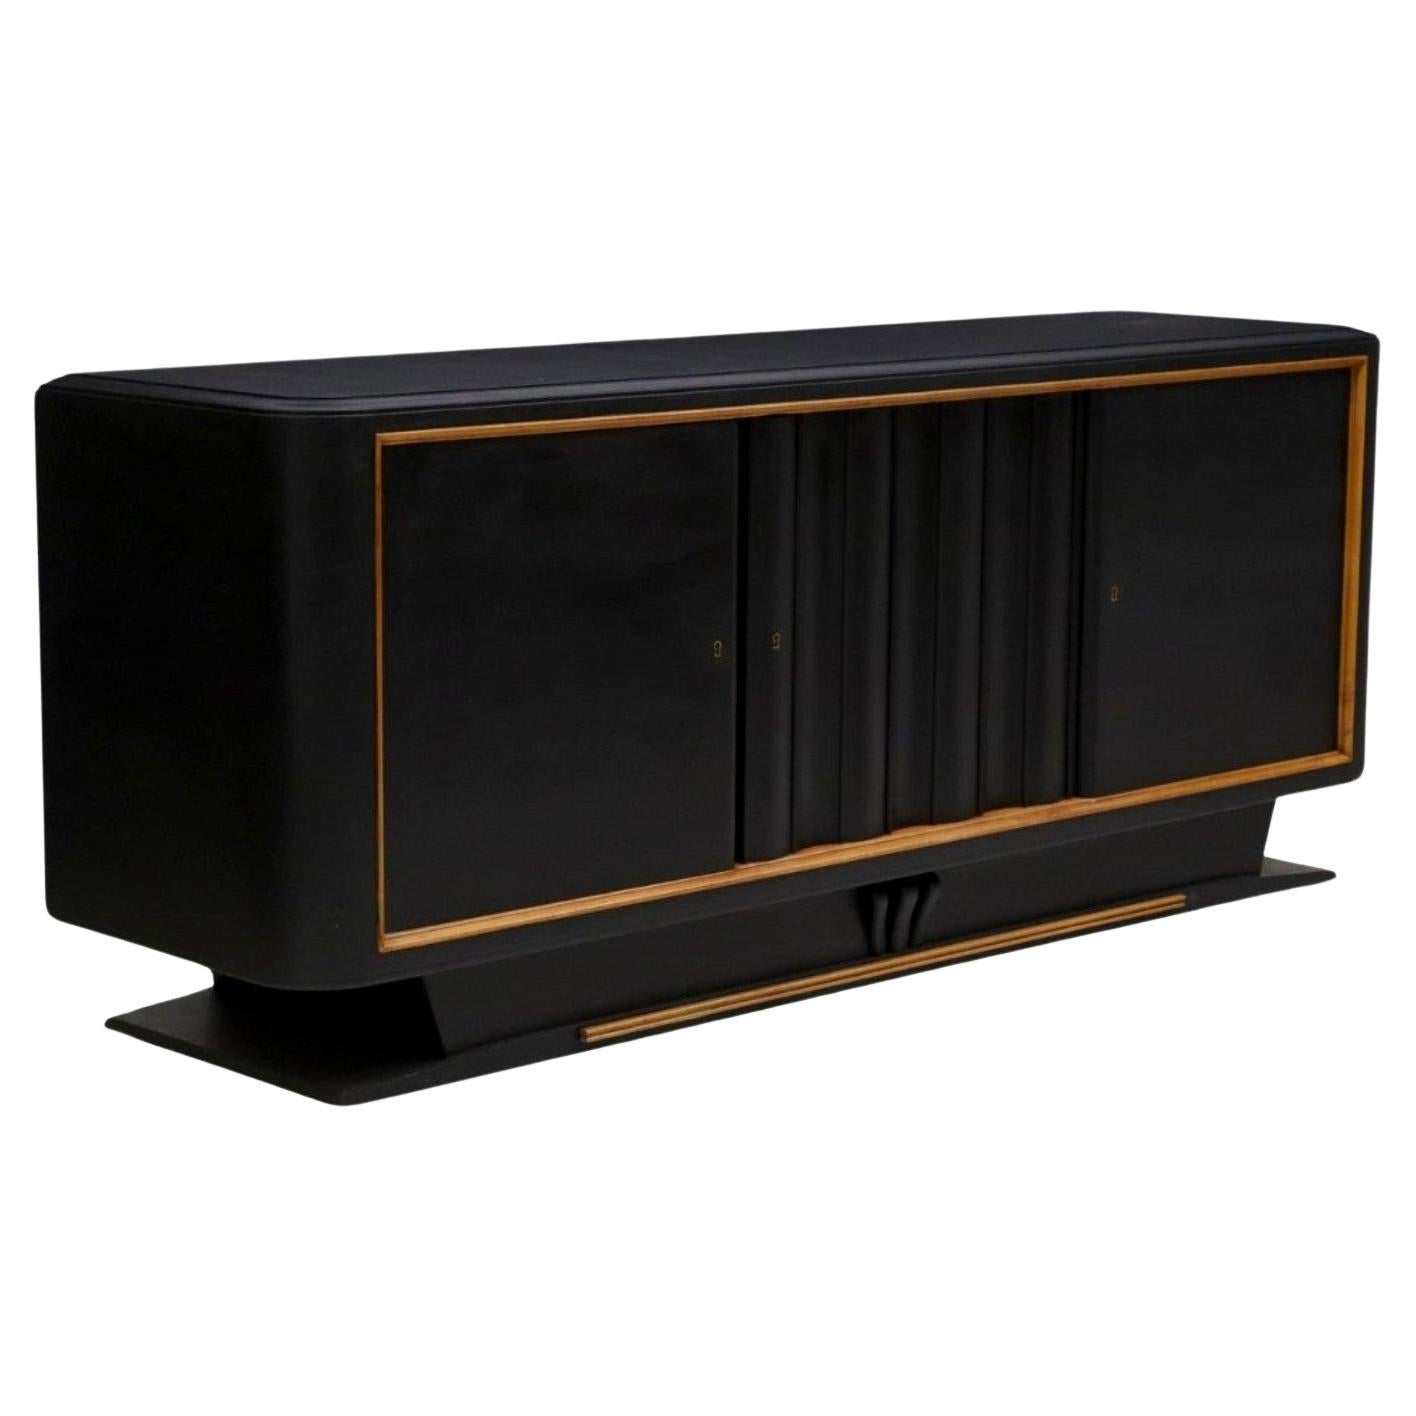 French Art Deco Moderne Painted Black Credenza Sideboard 